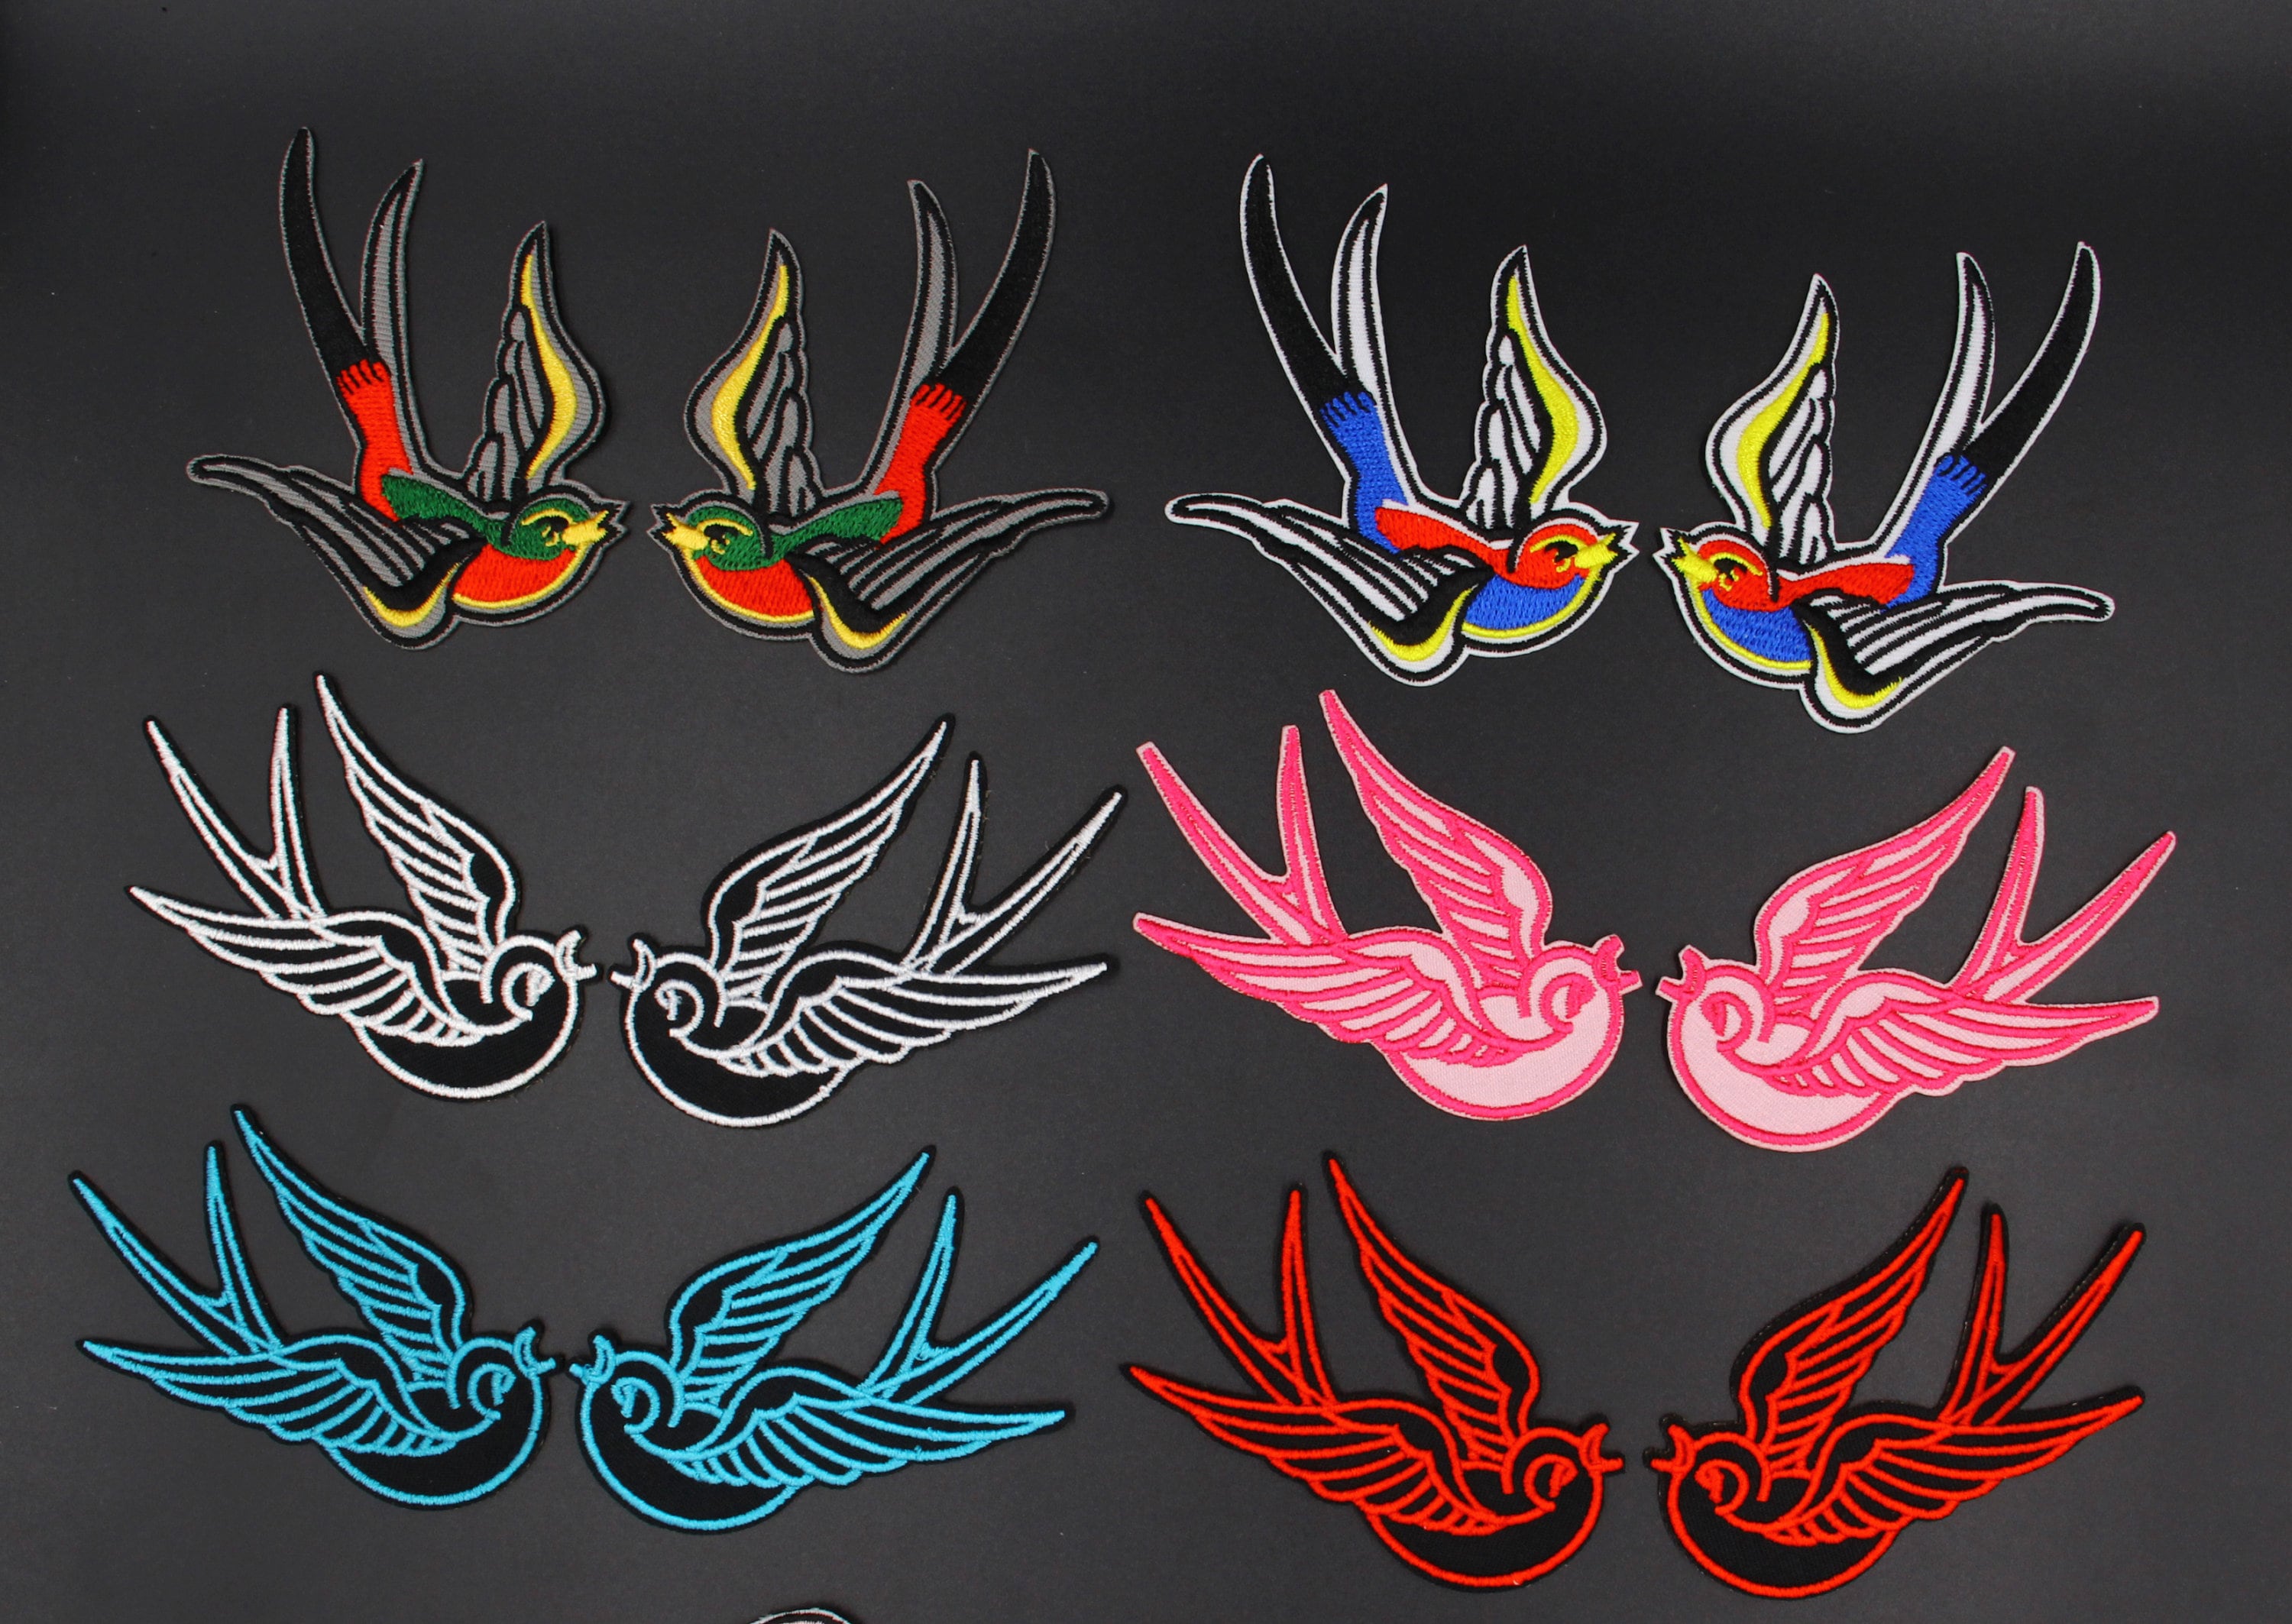 PINK SWALLOWS SPARROWS EMBROIDERED PATCHES rockabilly pin up girl tattoo art 